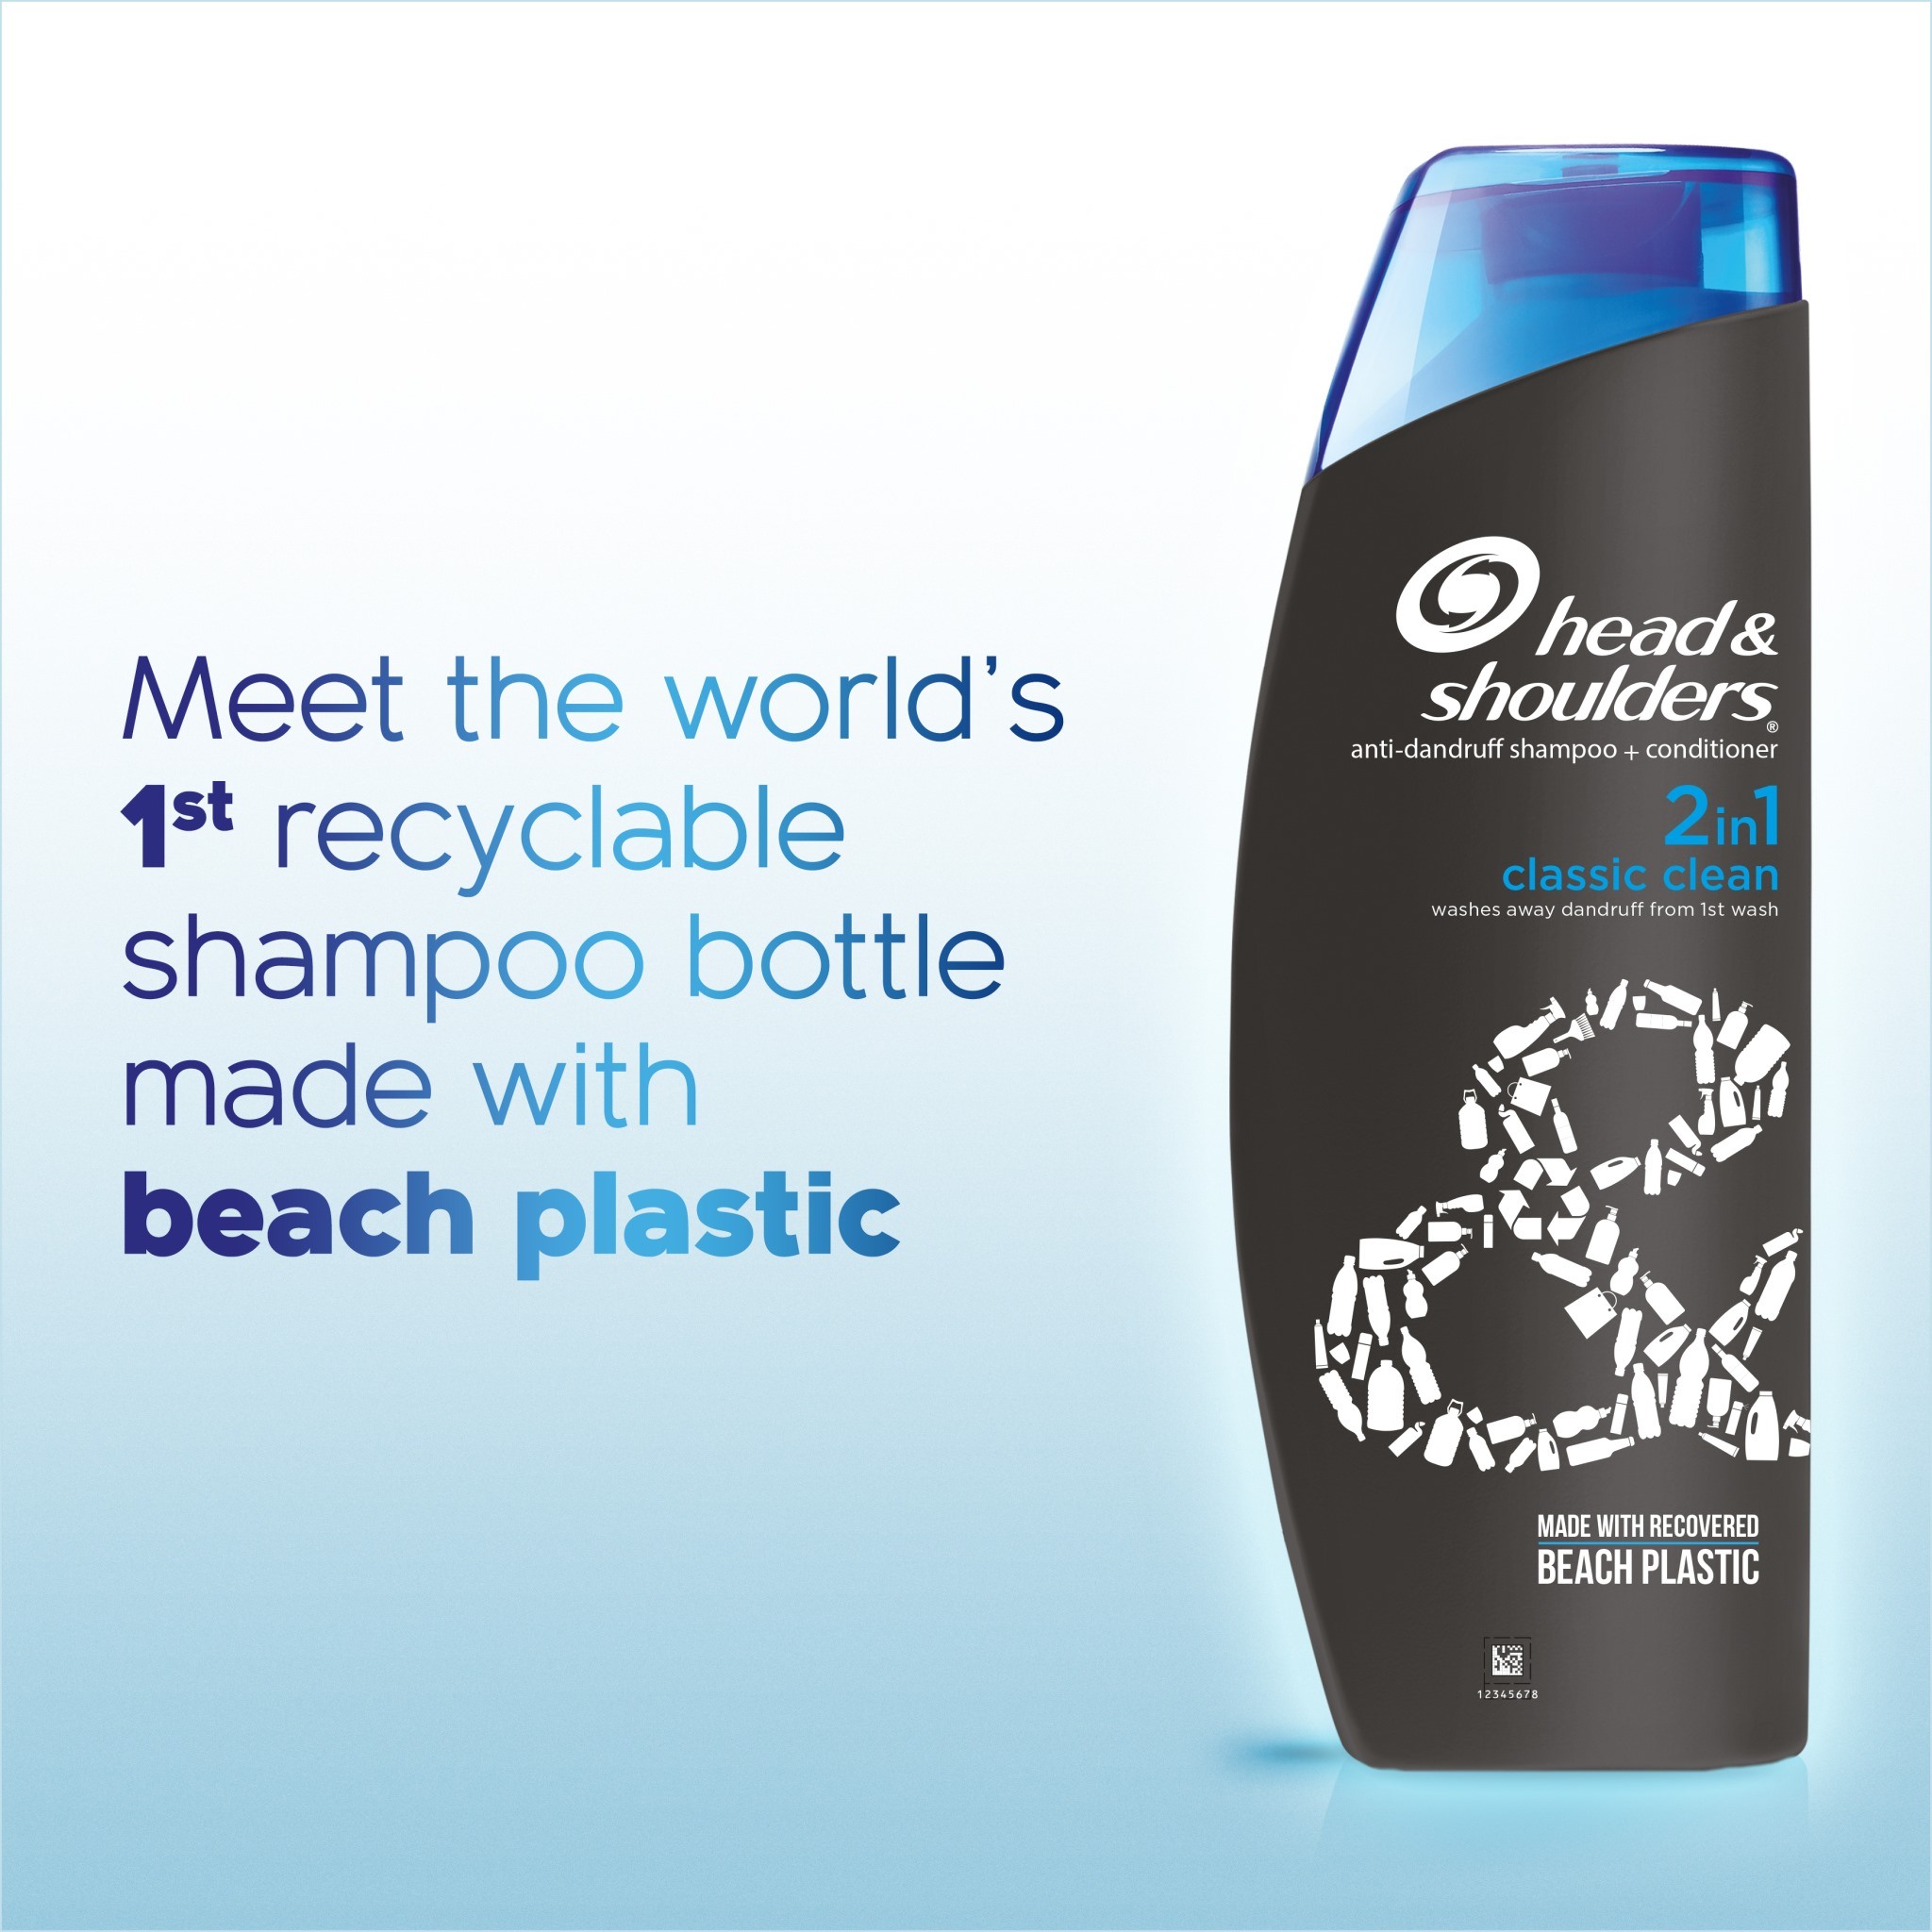  THE WORLD'S FIRST RECYCLABLE SHAMPOO BOTTLE MADE FROM BEACH PLASTIC-image